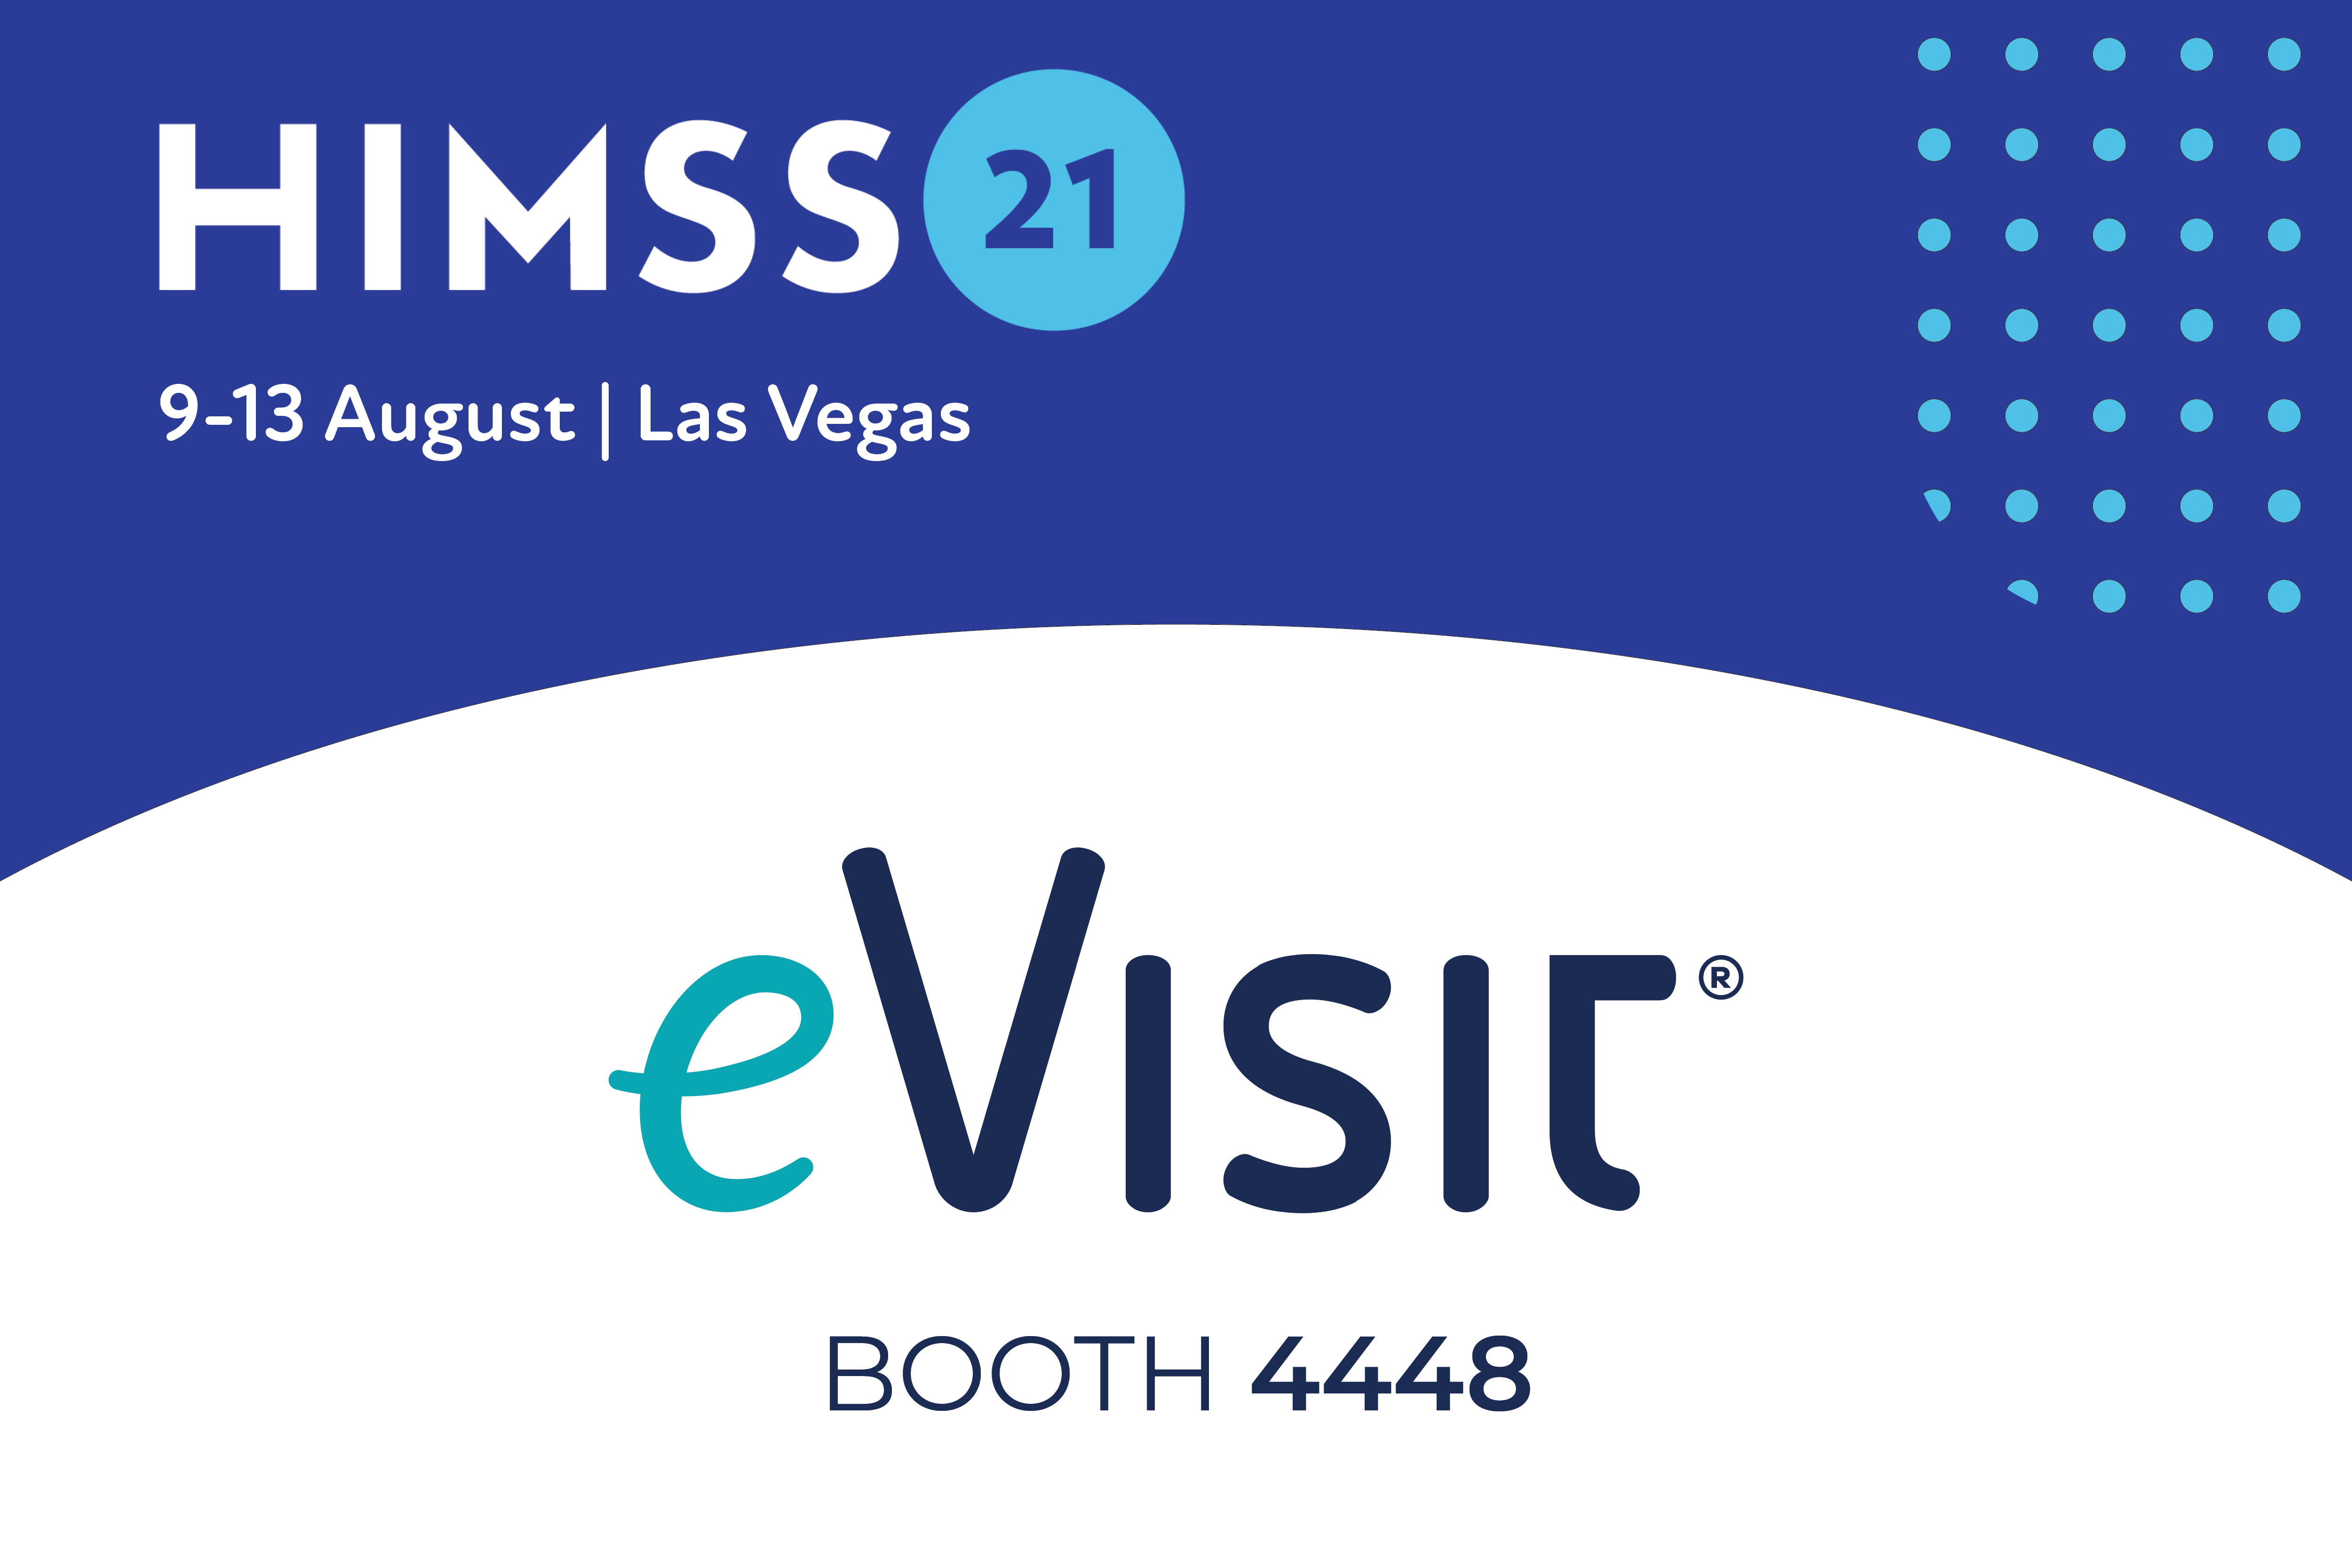 Looking Ahead eVisit’s First Time at HIMSS